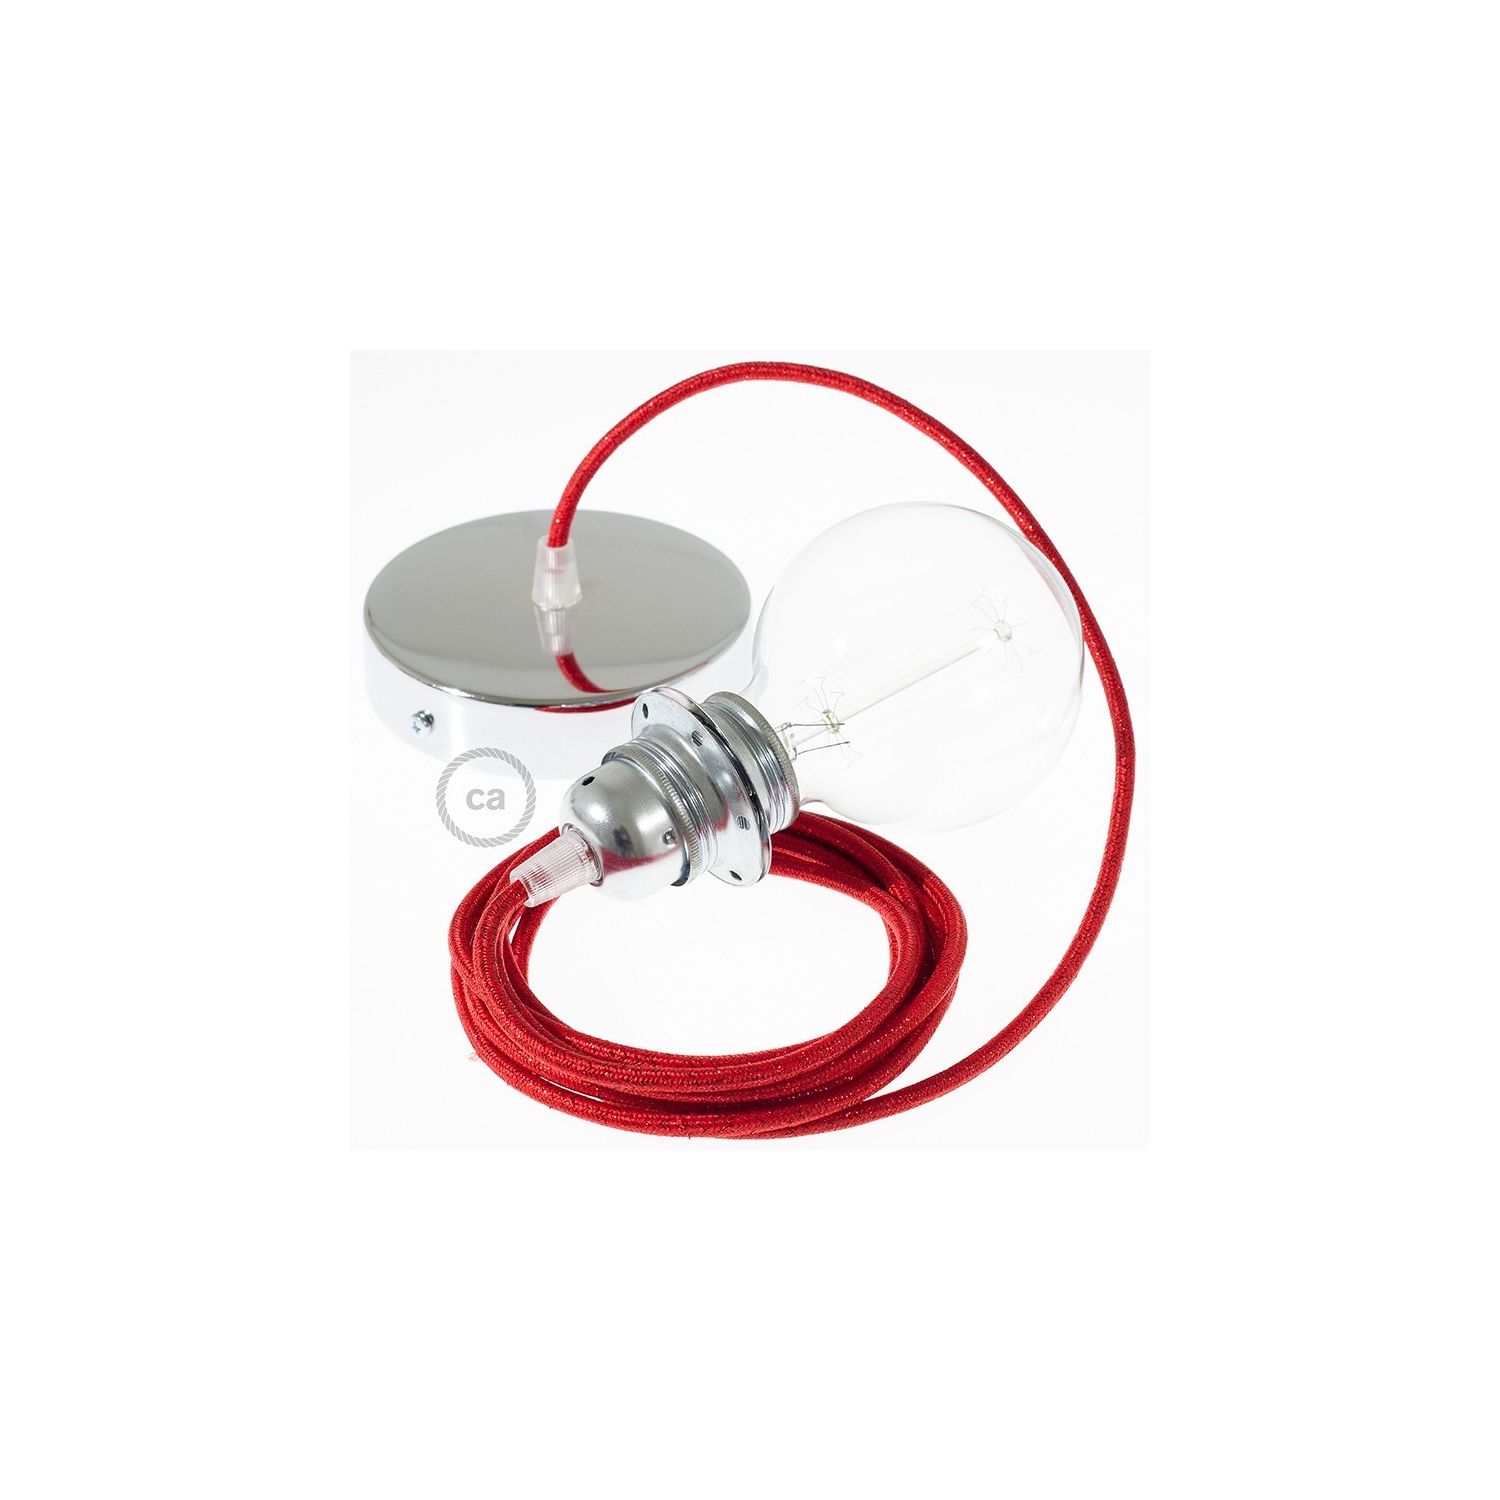 Pendant for lampshade, suspended lamp with Glittering Red textile cable RL09